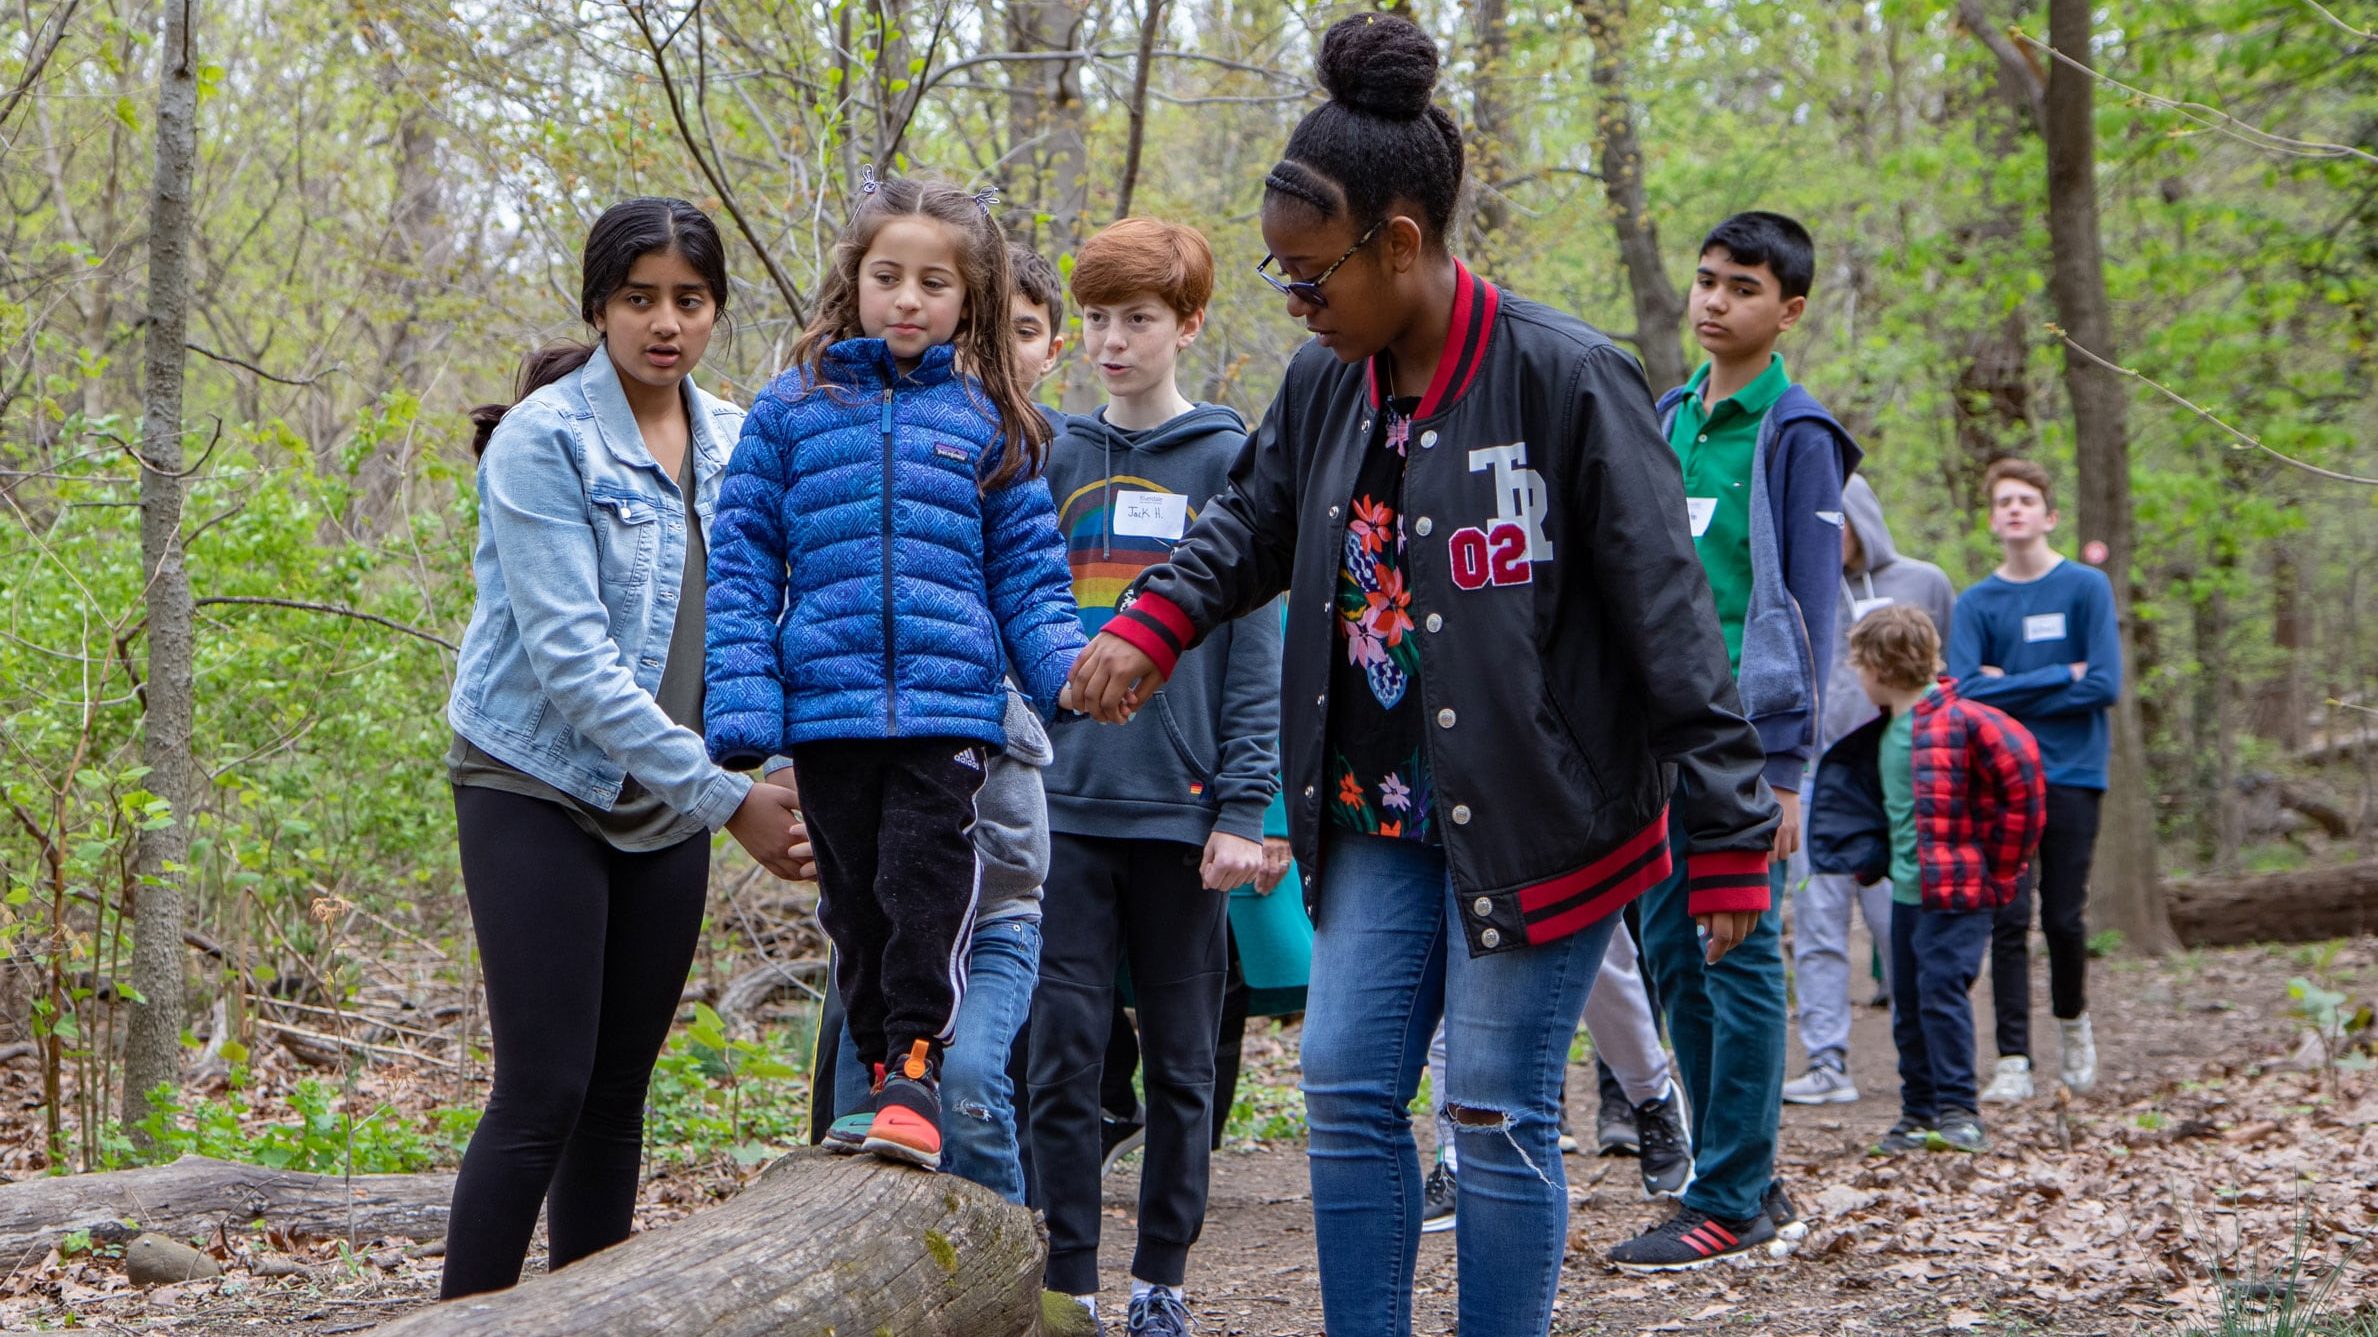 Eighth graders lead kindergarteners on a nature walk in Riverdale Park, which runs alongside the River Campus.